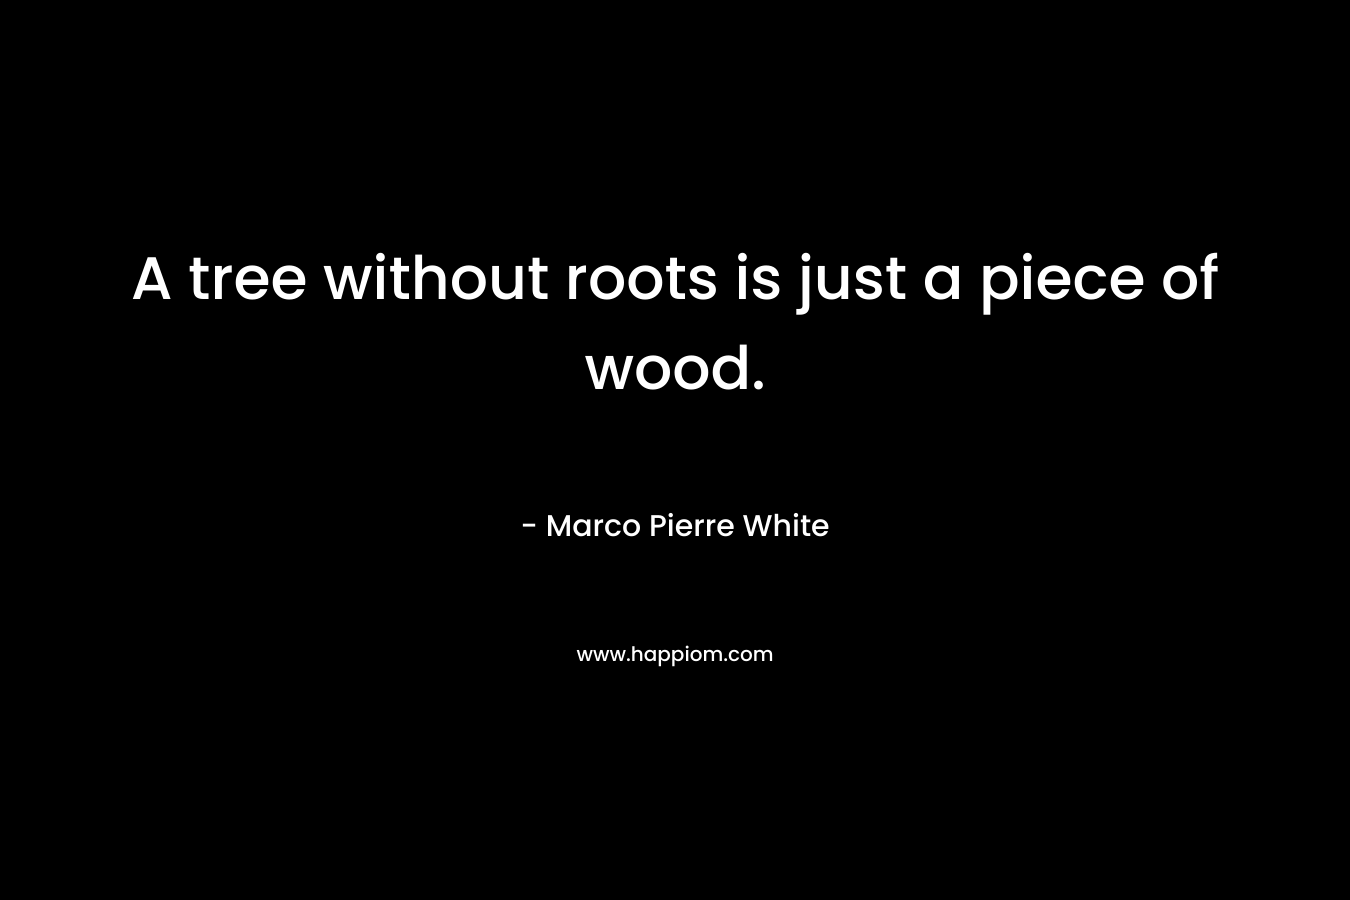 A tree without roots is just a piece of wood. – Marco Pierre White